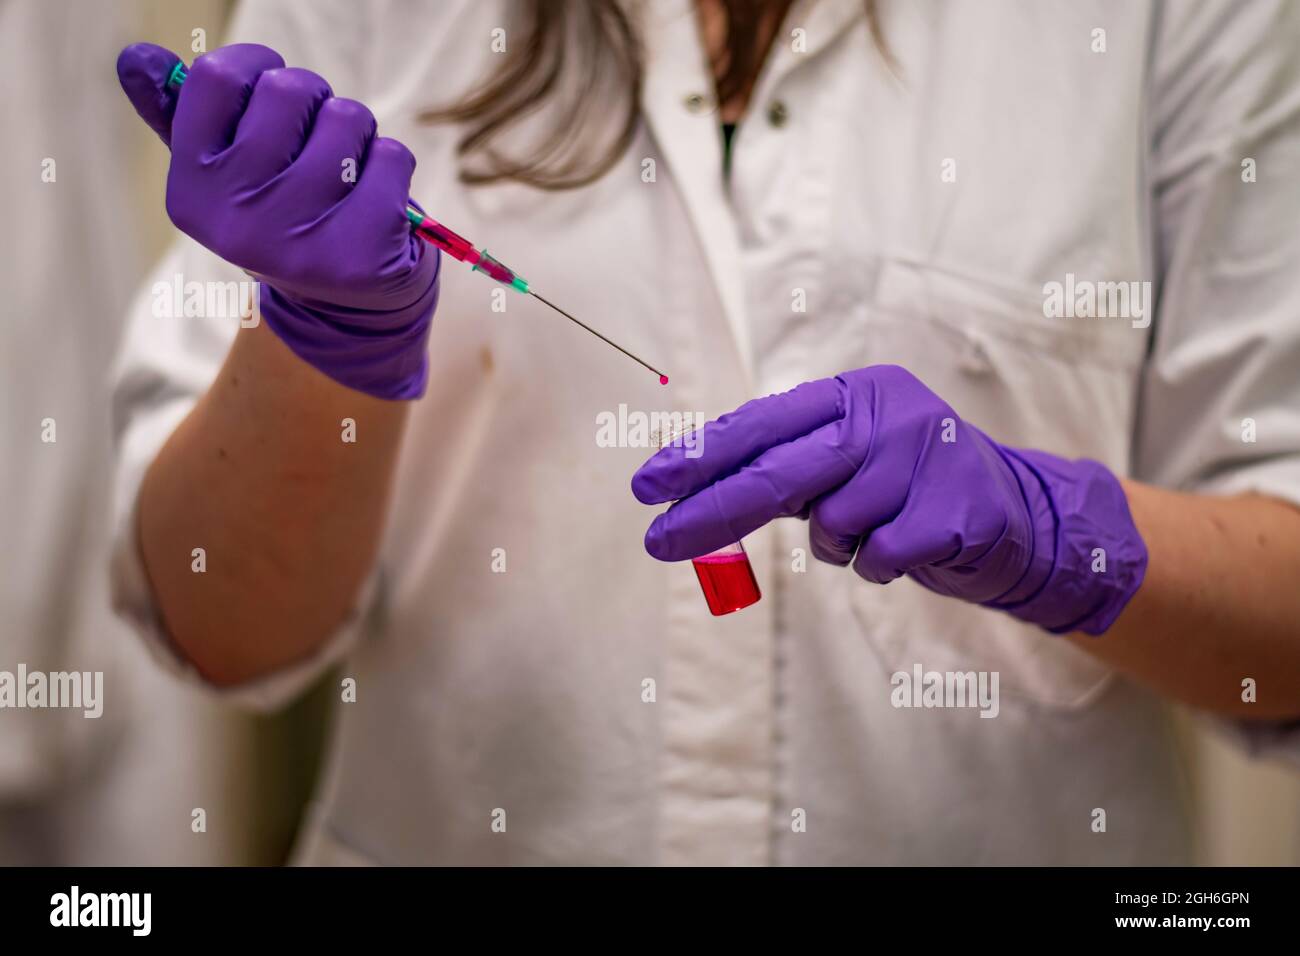 A woman researcher adding toxic reagent carefully in a chemistry laboratory wearing gloves and lab coat as protective measure Stock Photo